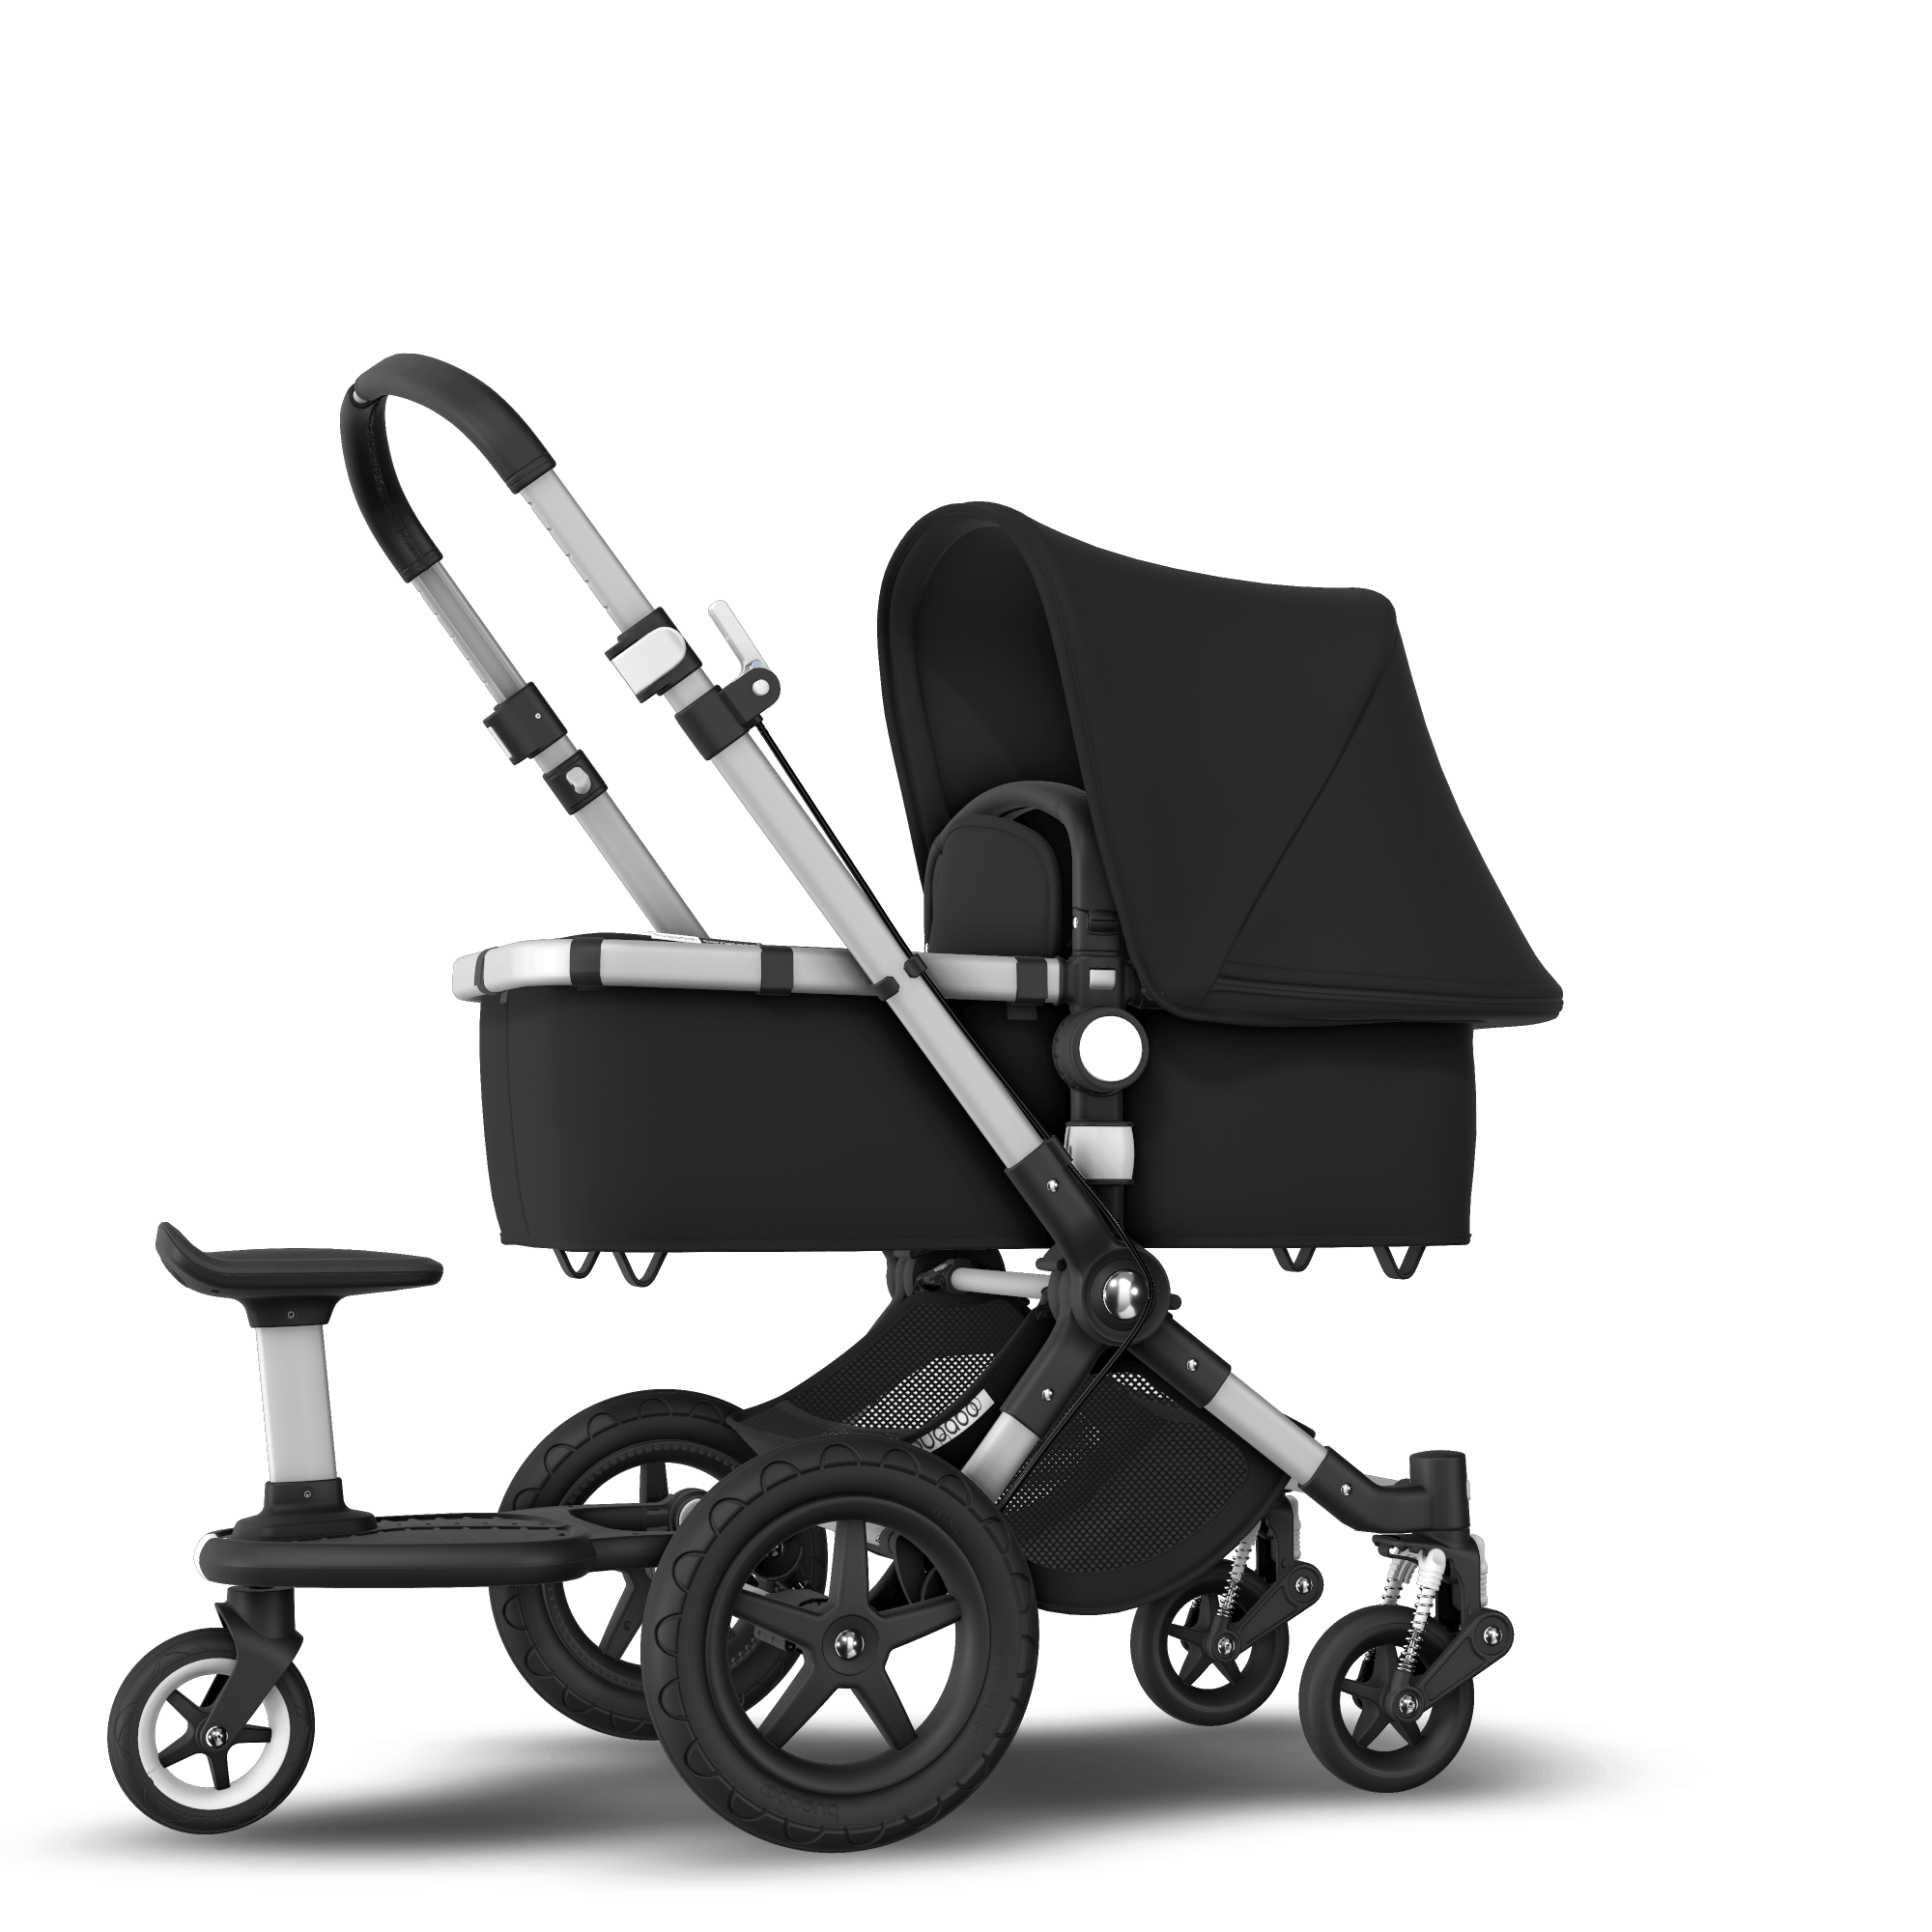 Bugaboo Cameleon 3 Plus Sit and stand stroller Black sun canopy